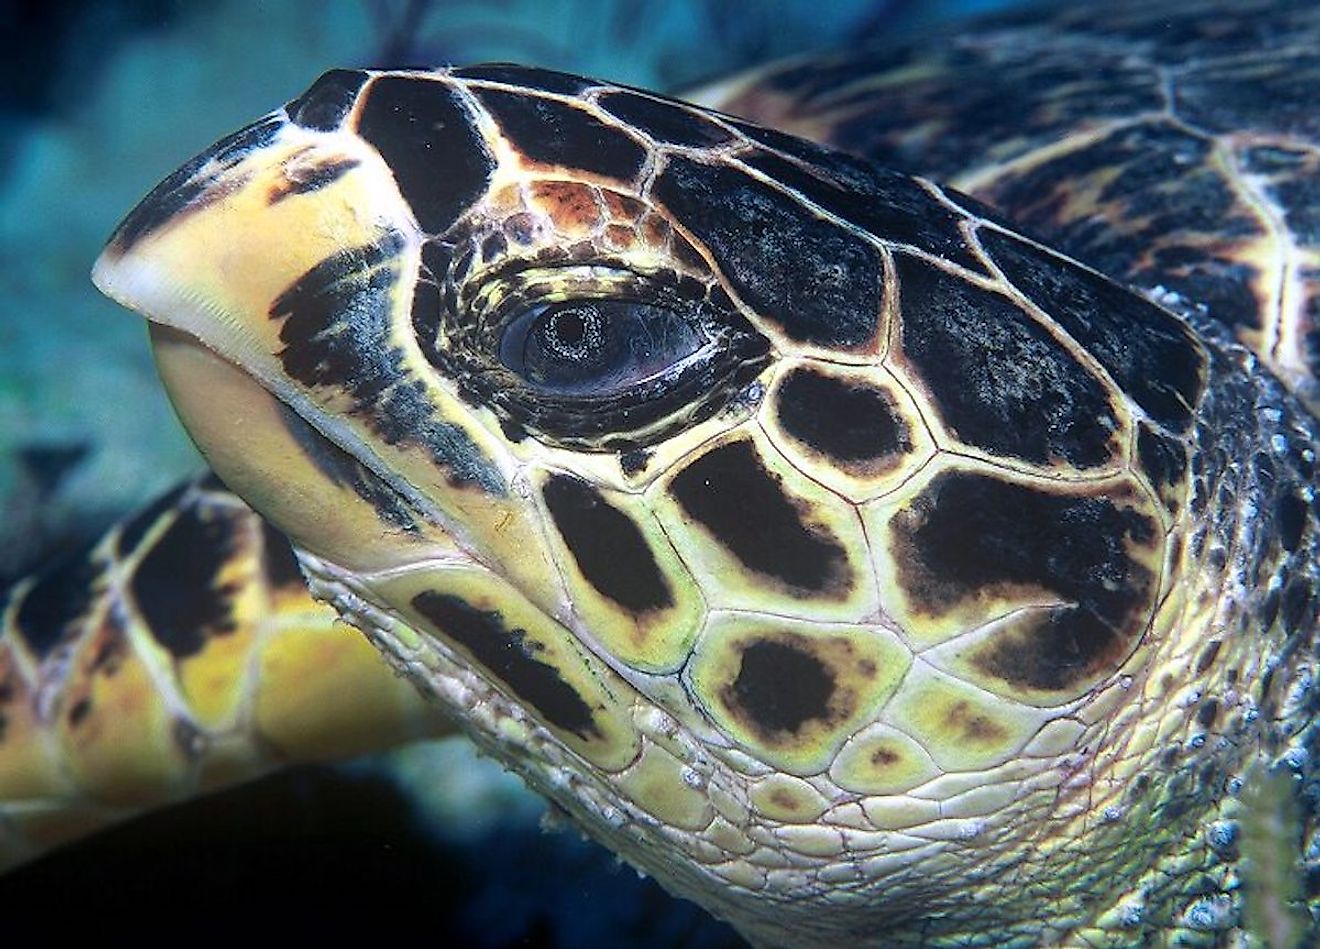 A hawksbill turtle is named so for its hawk-like shape of the bill. Image credit: Tom Doeppner/Wikimedia.org